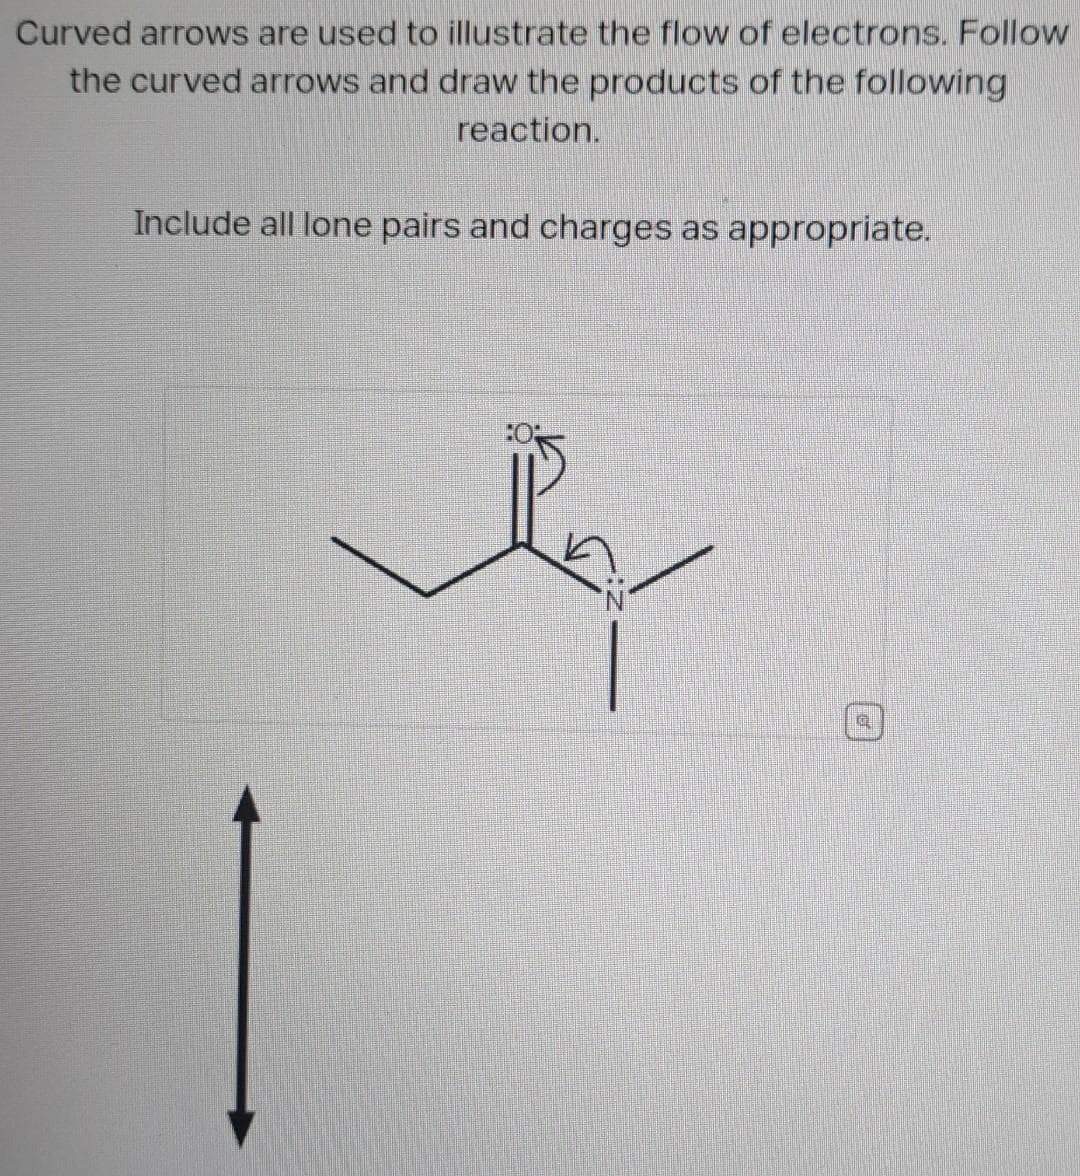 Curved arrows are used to illustrate the flow of electrons. Follow
the curved arrows and draw the products of the following
reaction.
Include all lone pairs and charges as appropriate.
Q